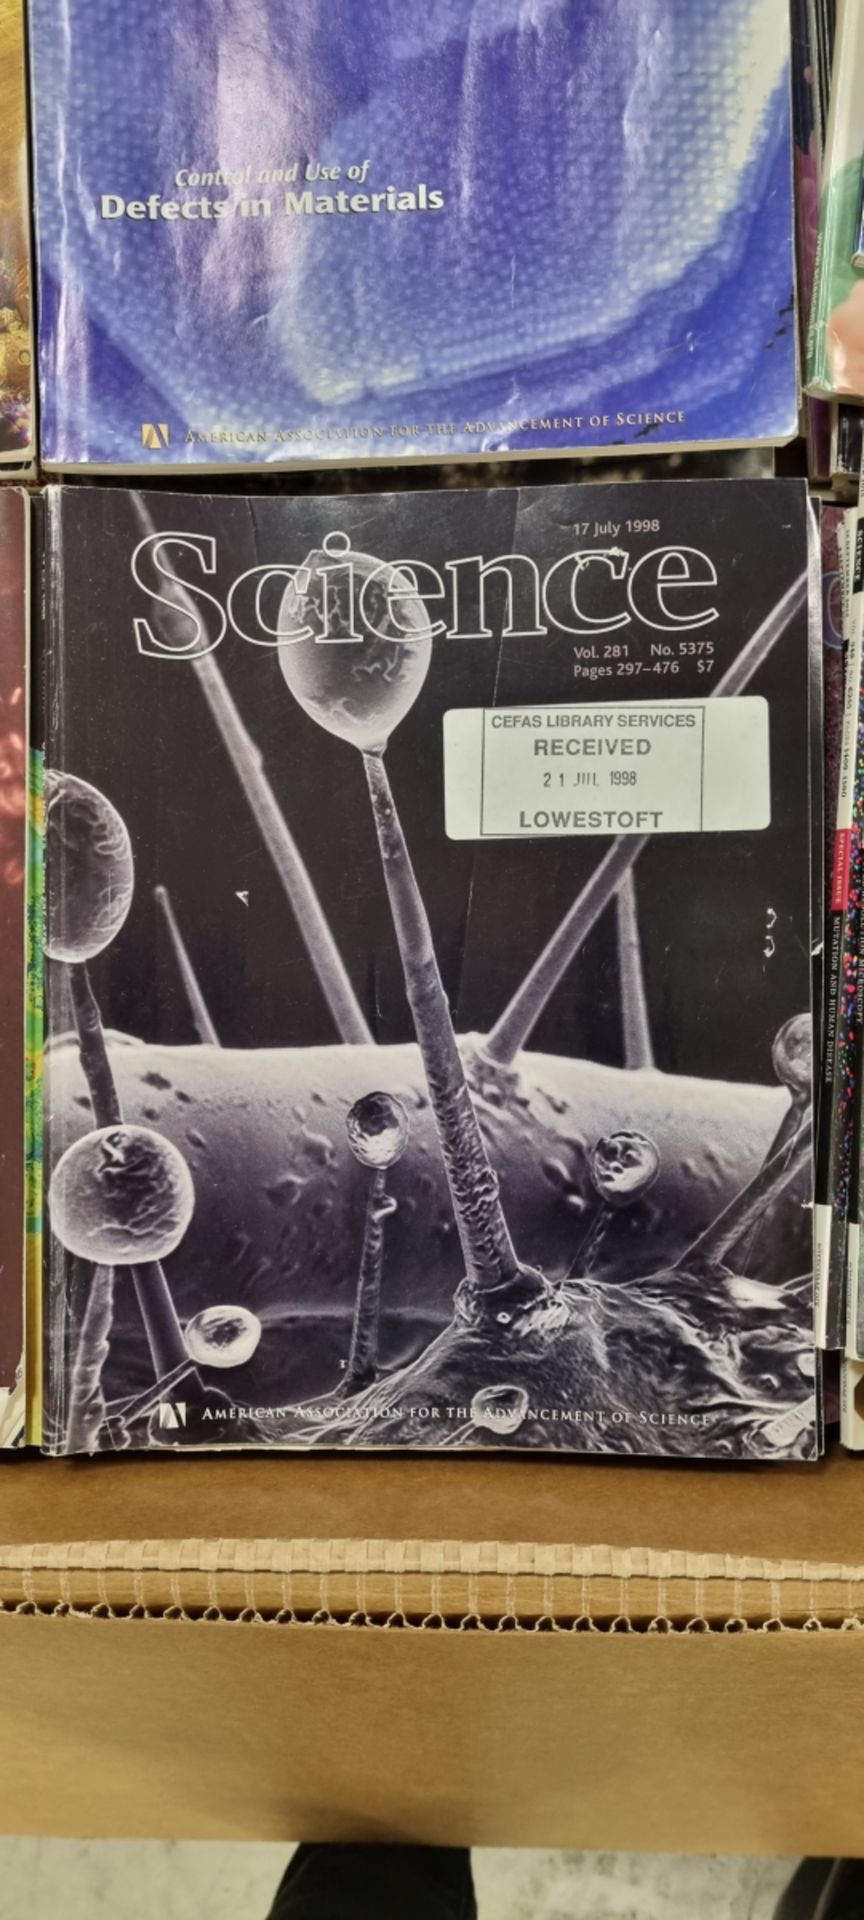 American Association for the Advancement of Science (AAAS) science magazines - dates ranging from 19 - Image 2 of 4